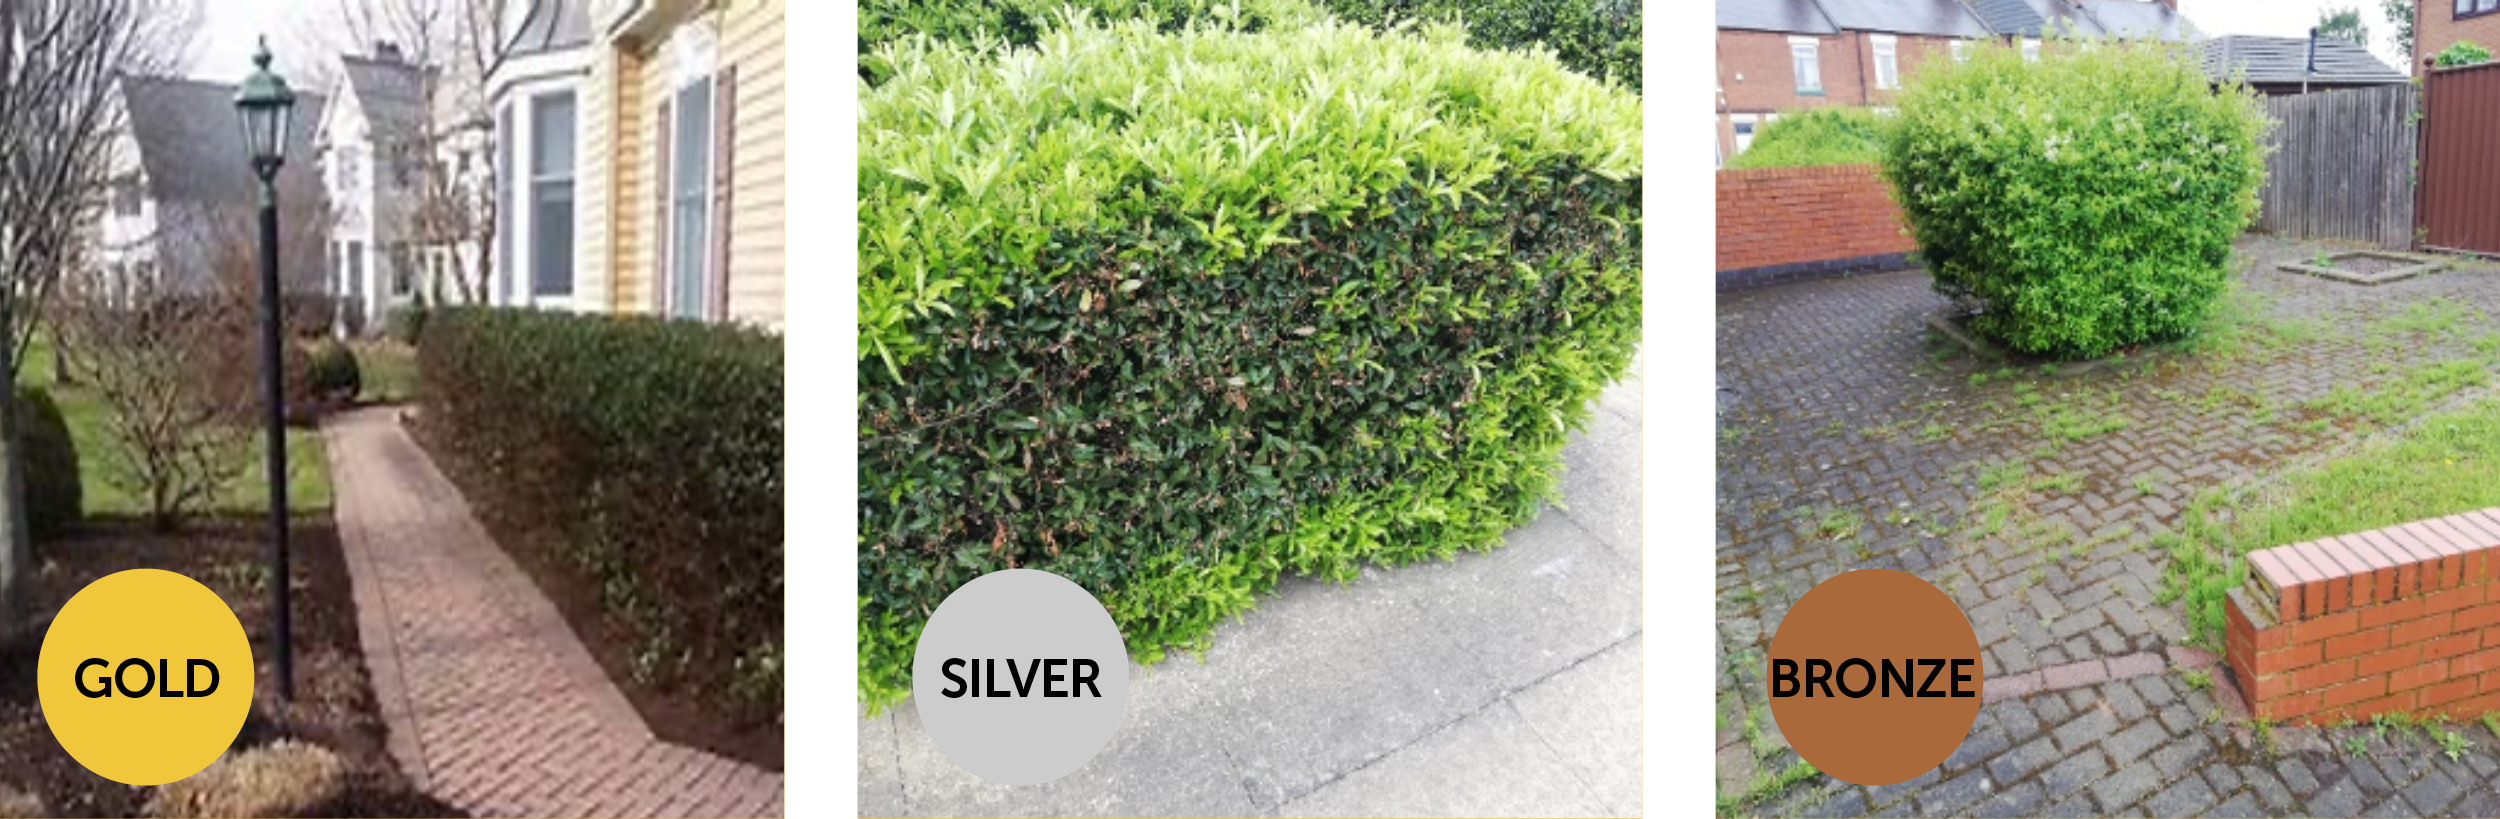 Pruning standards image guide